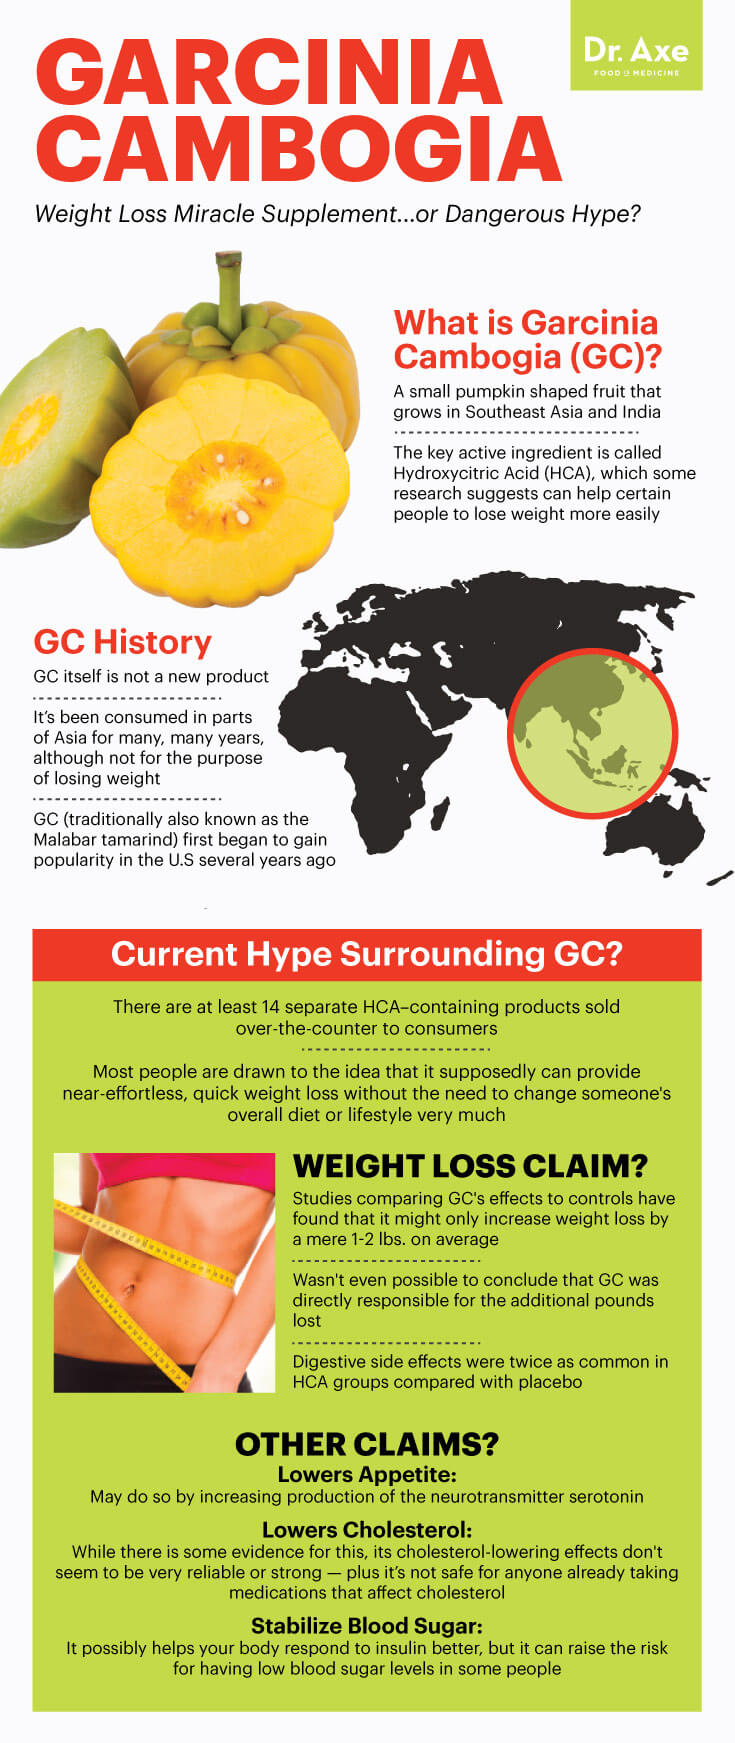 What is garcinia cambogia - Dr. Axe